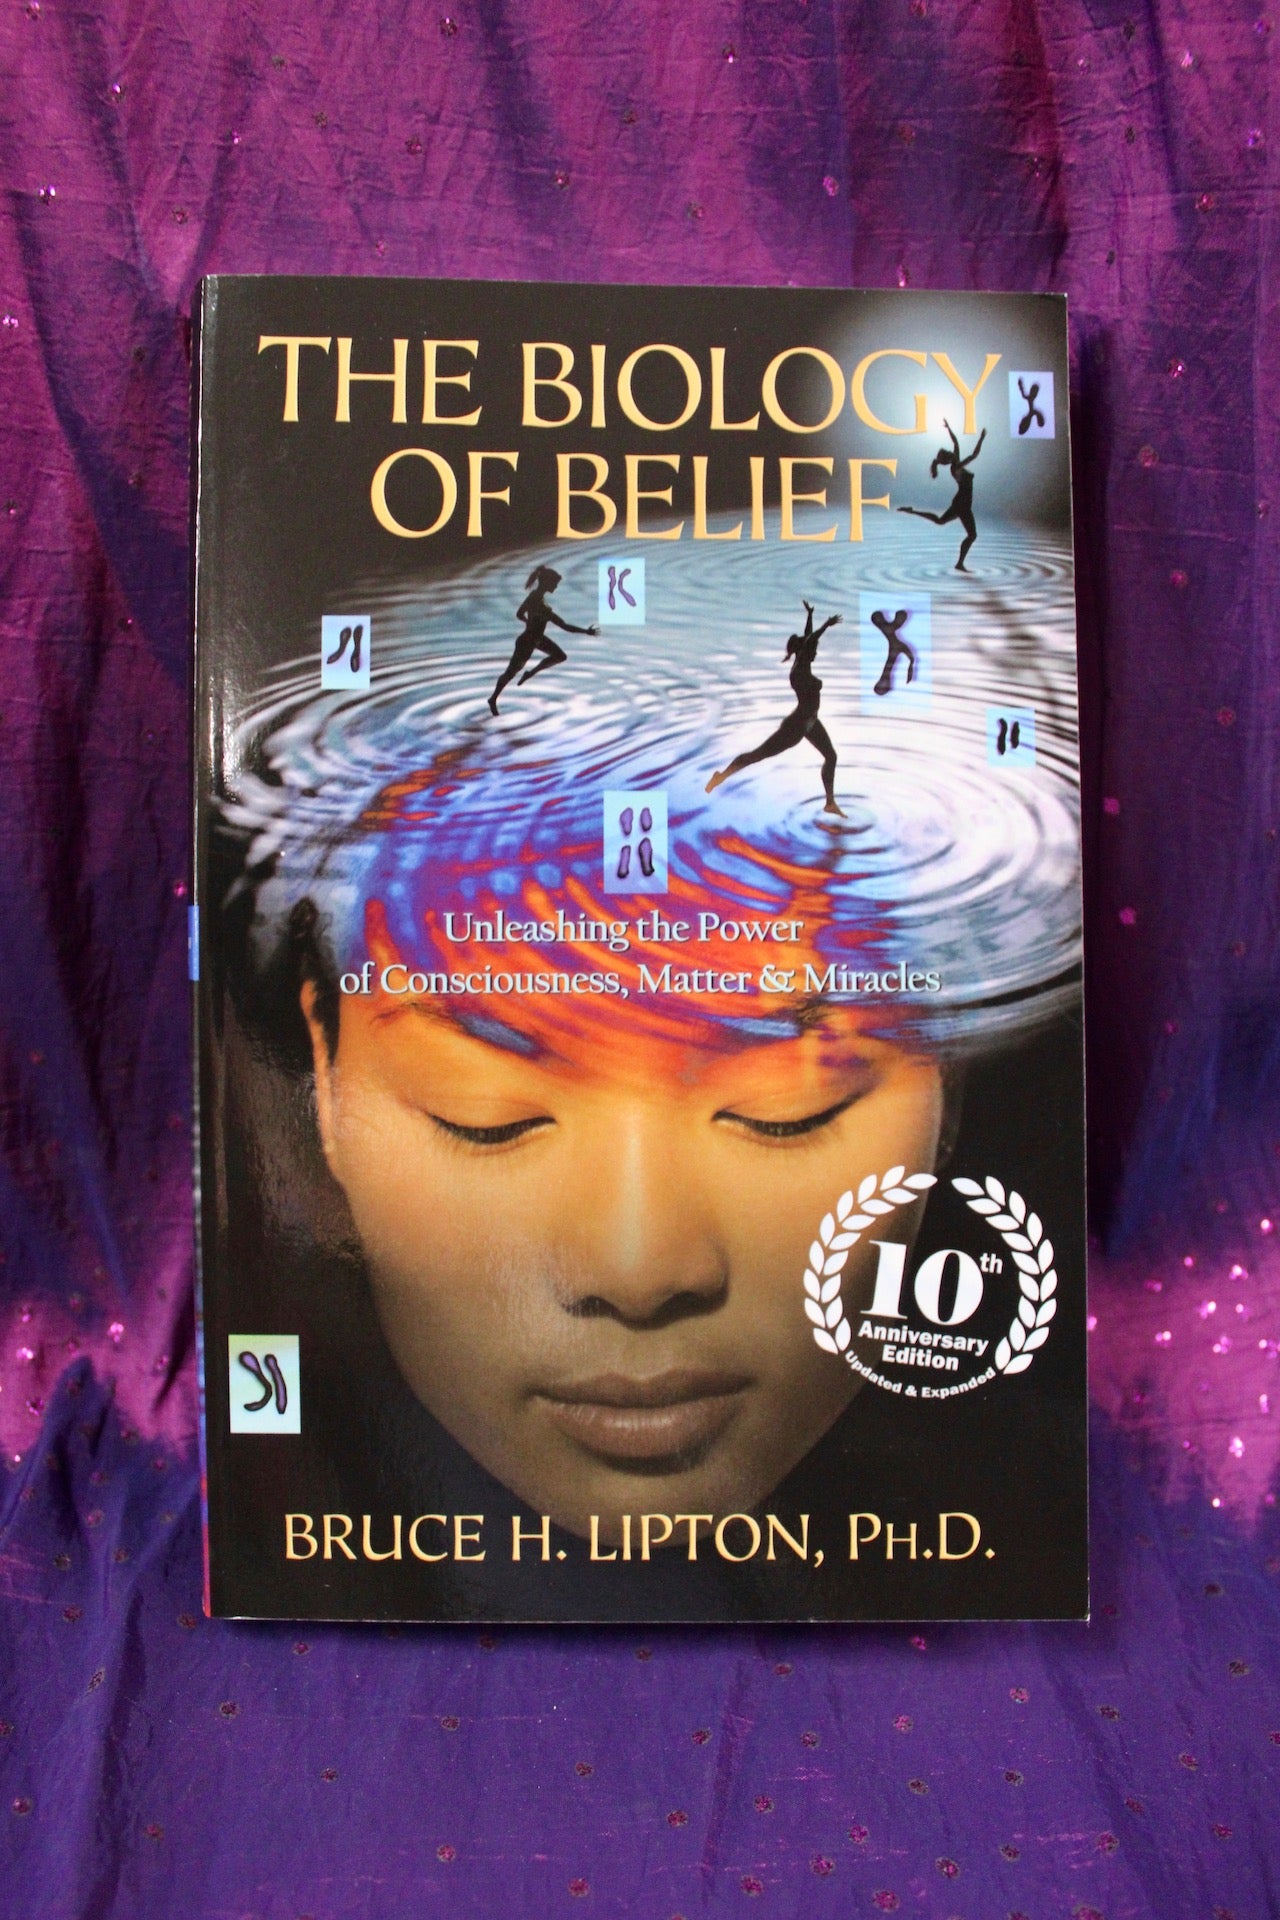 The Biology of Belief, Unleashing the Power of Consciousness, Matter & Miracles; Bruce H. Lipton